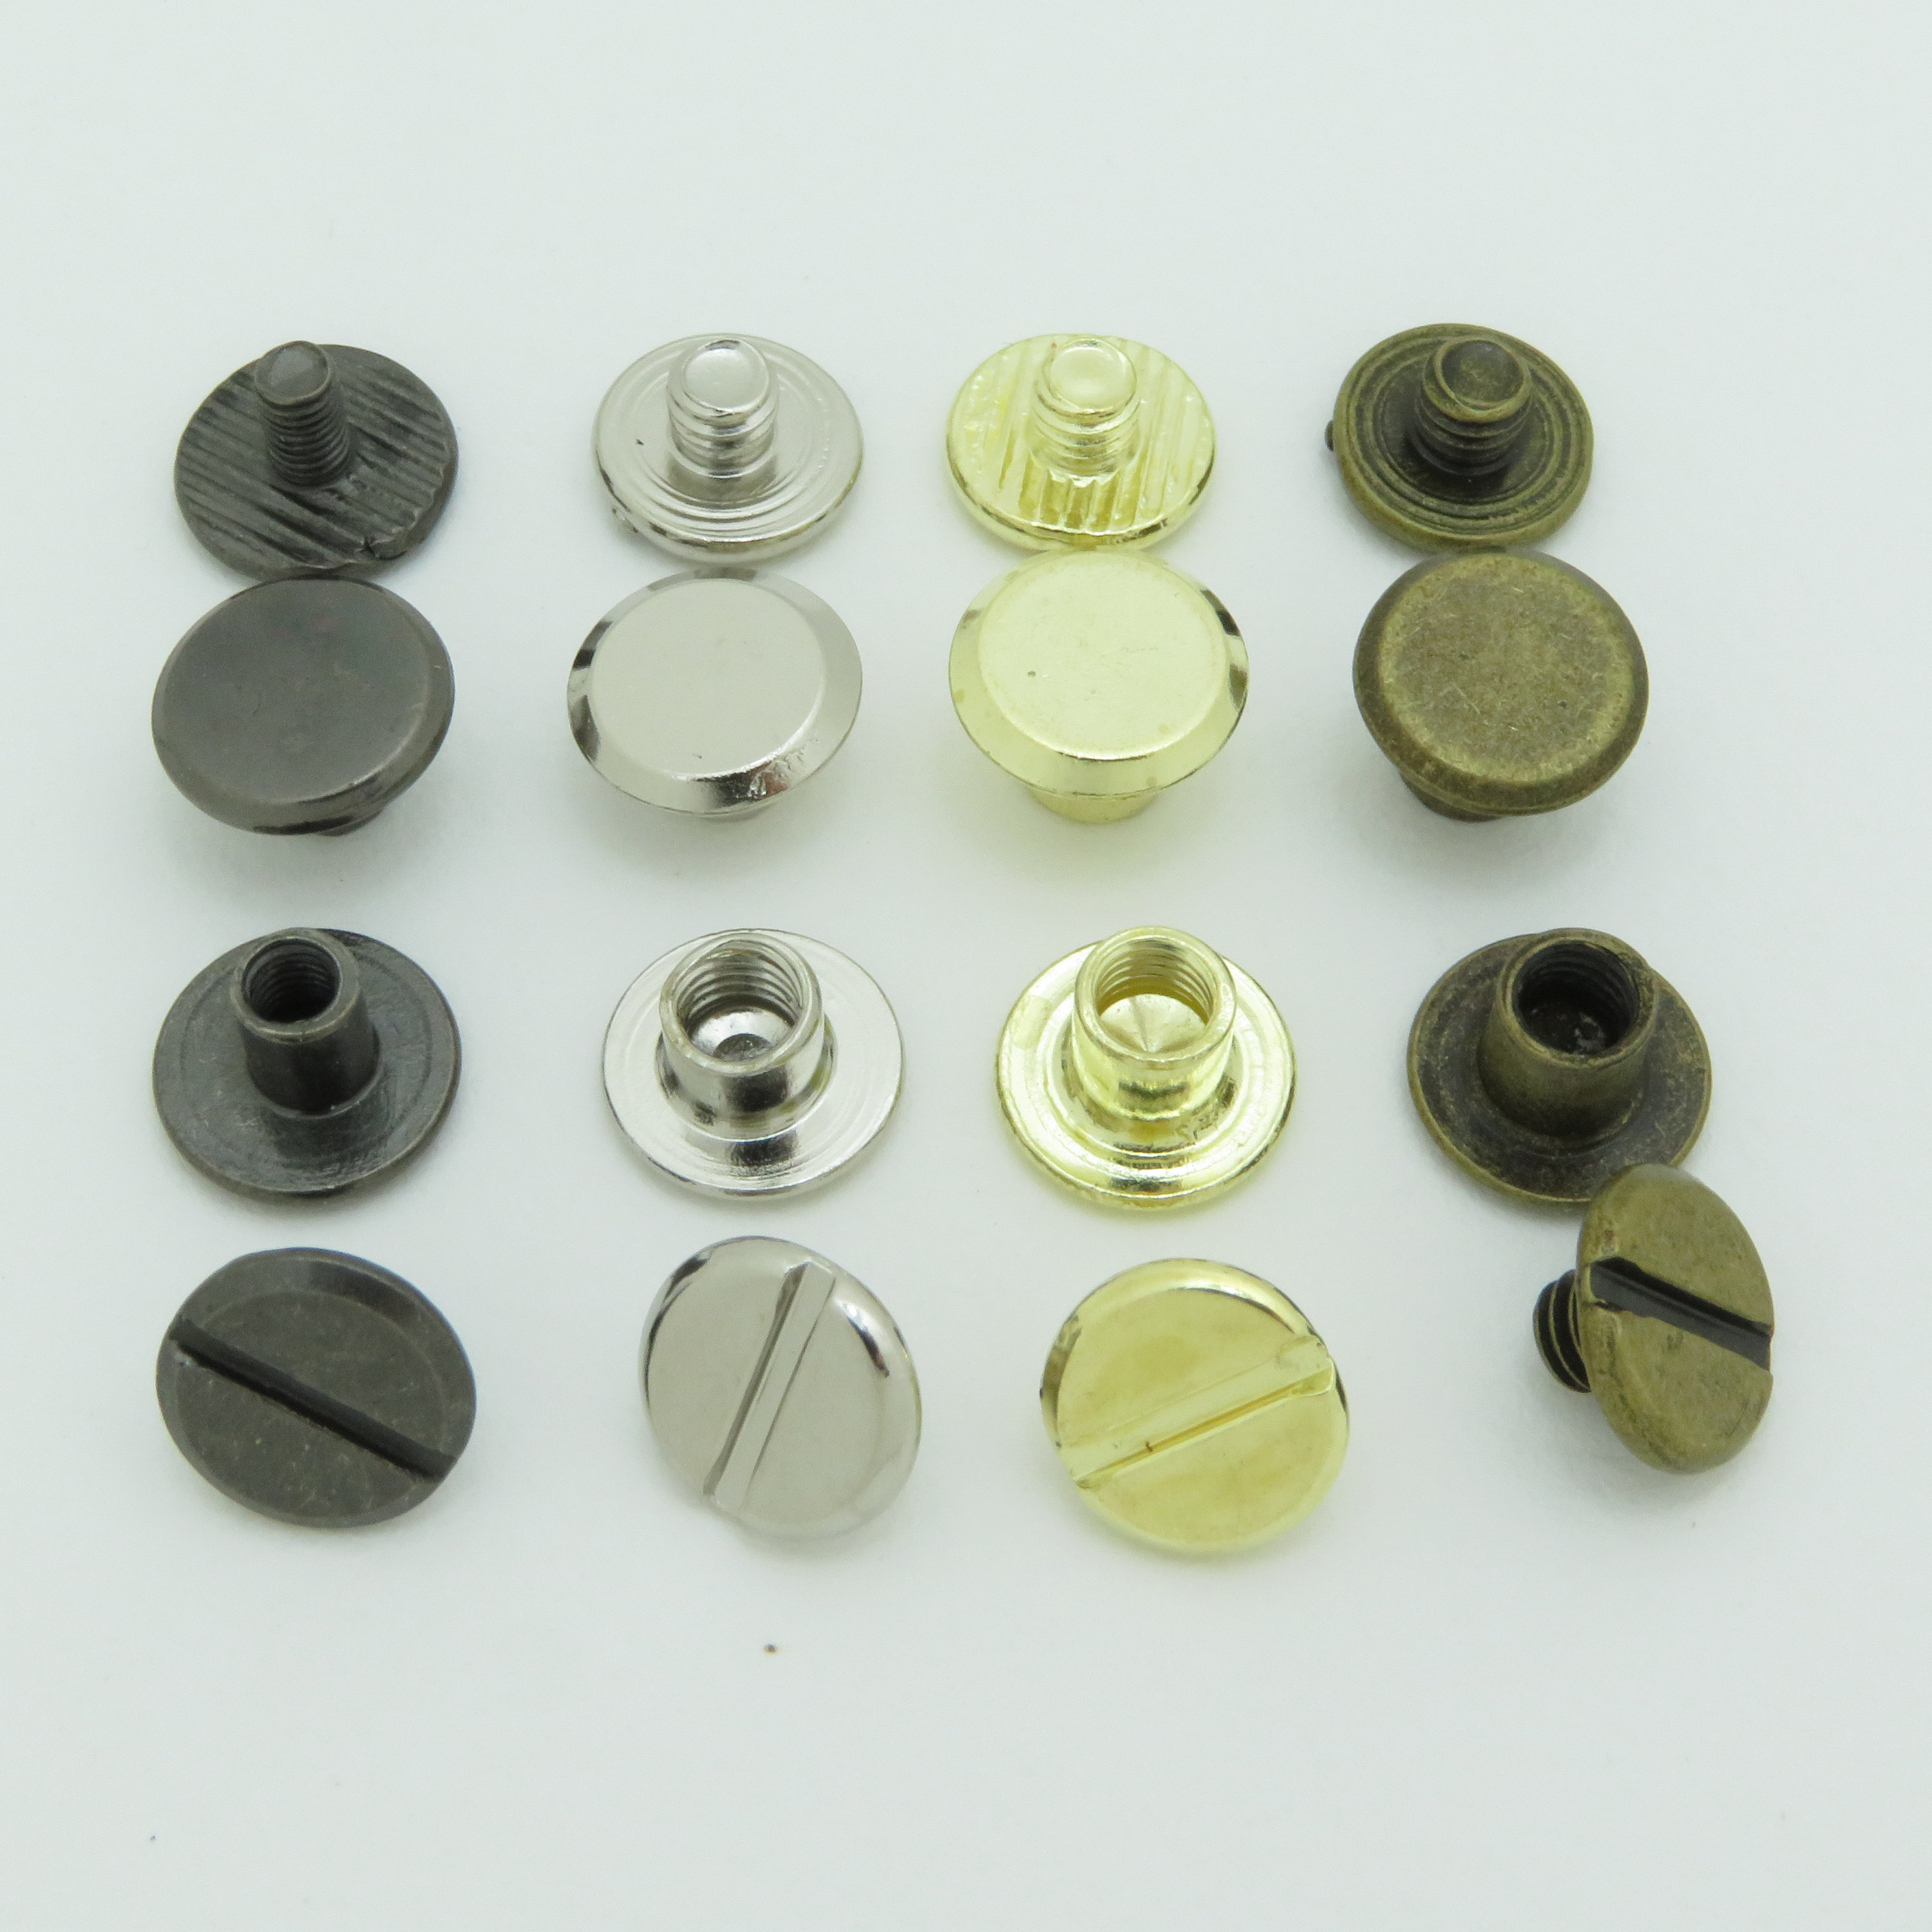 100 Pieces Eyelets For Diy Kydex Sheath Making 7mm Rivet Hand Tool Parts  7x6mm - Tool Parts - AliExpress